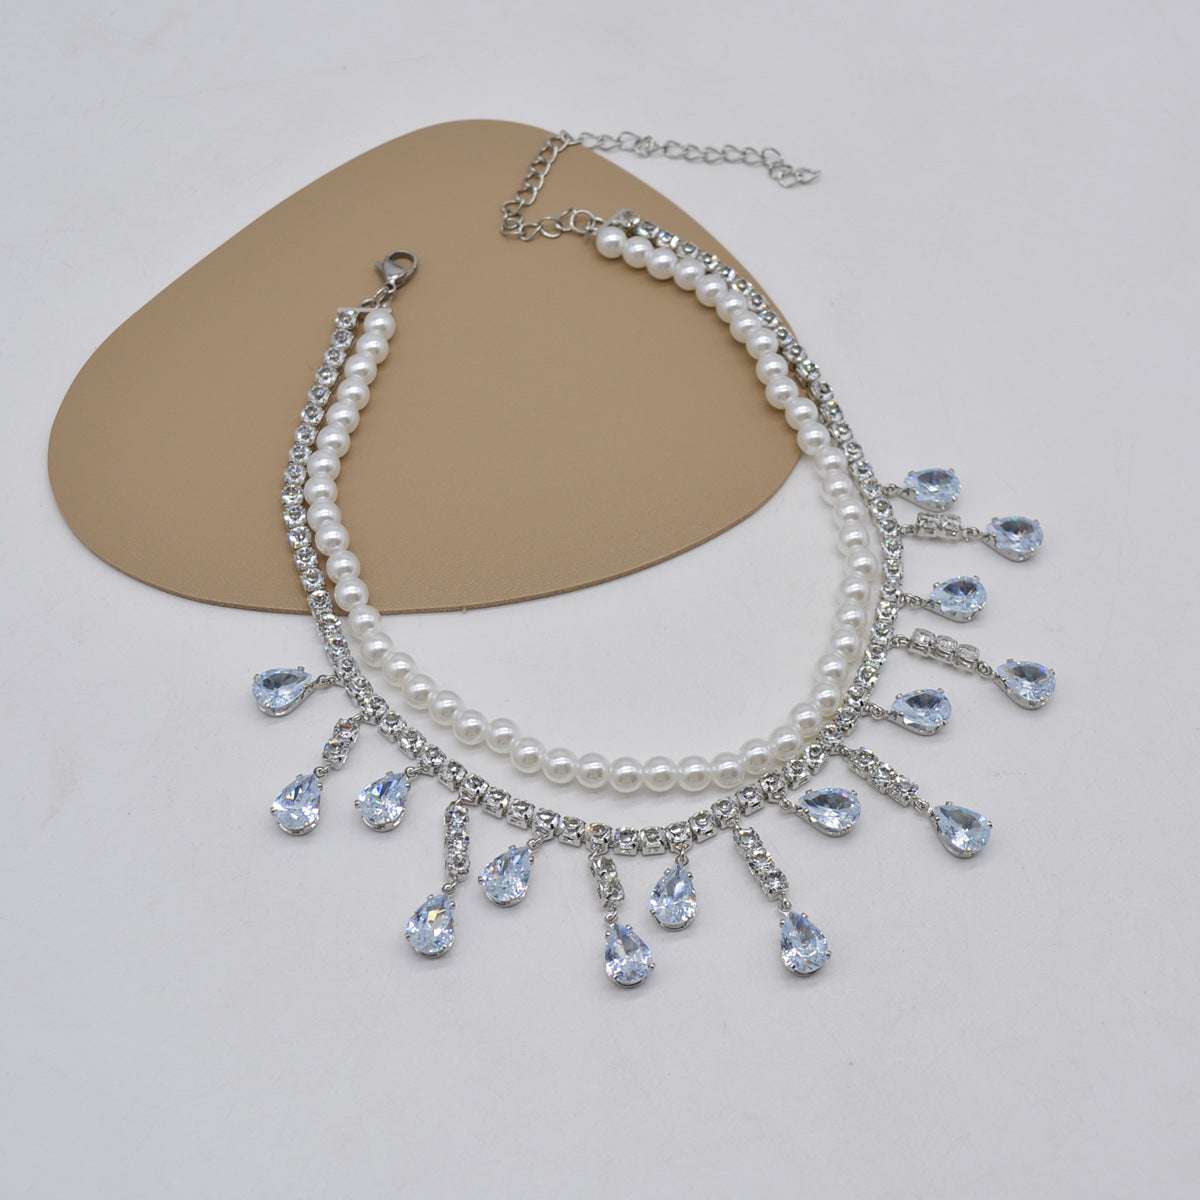 Drop Pearl Necklace, Exquisite Diamond Necklace - available at Sparq Mart